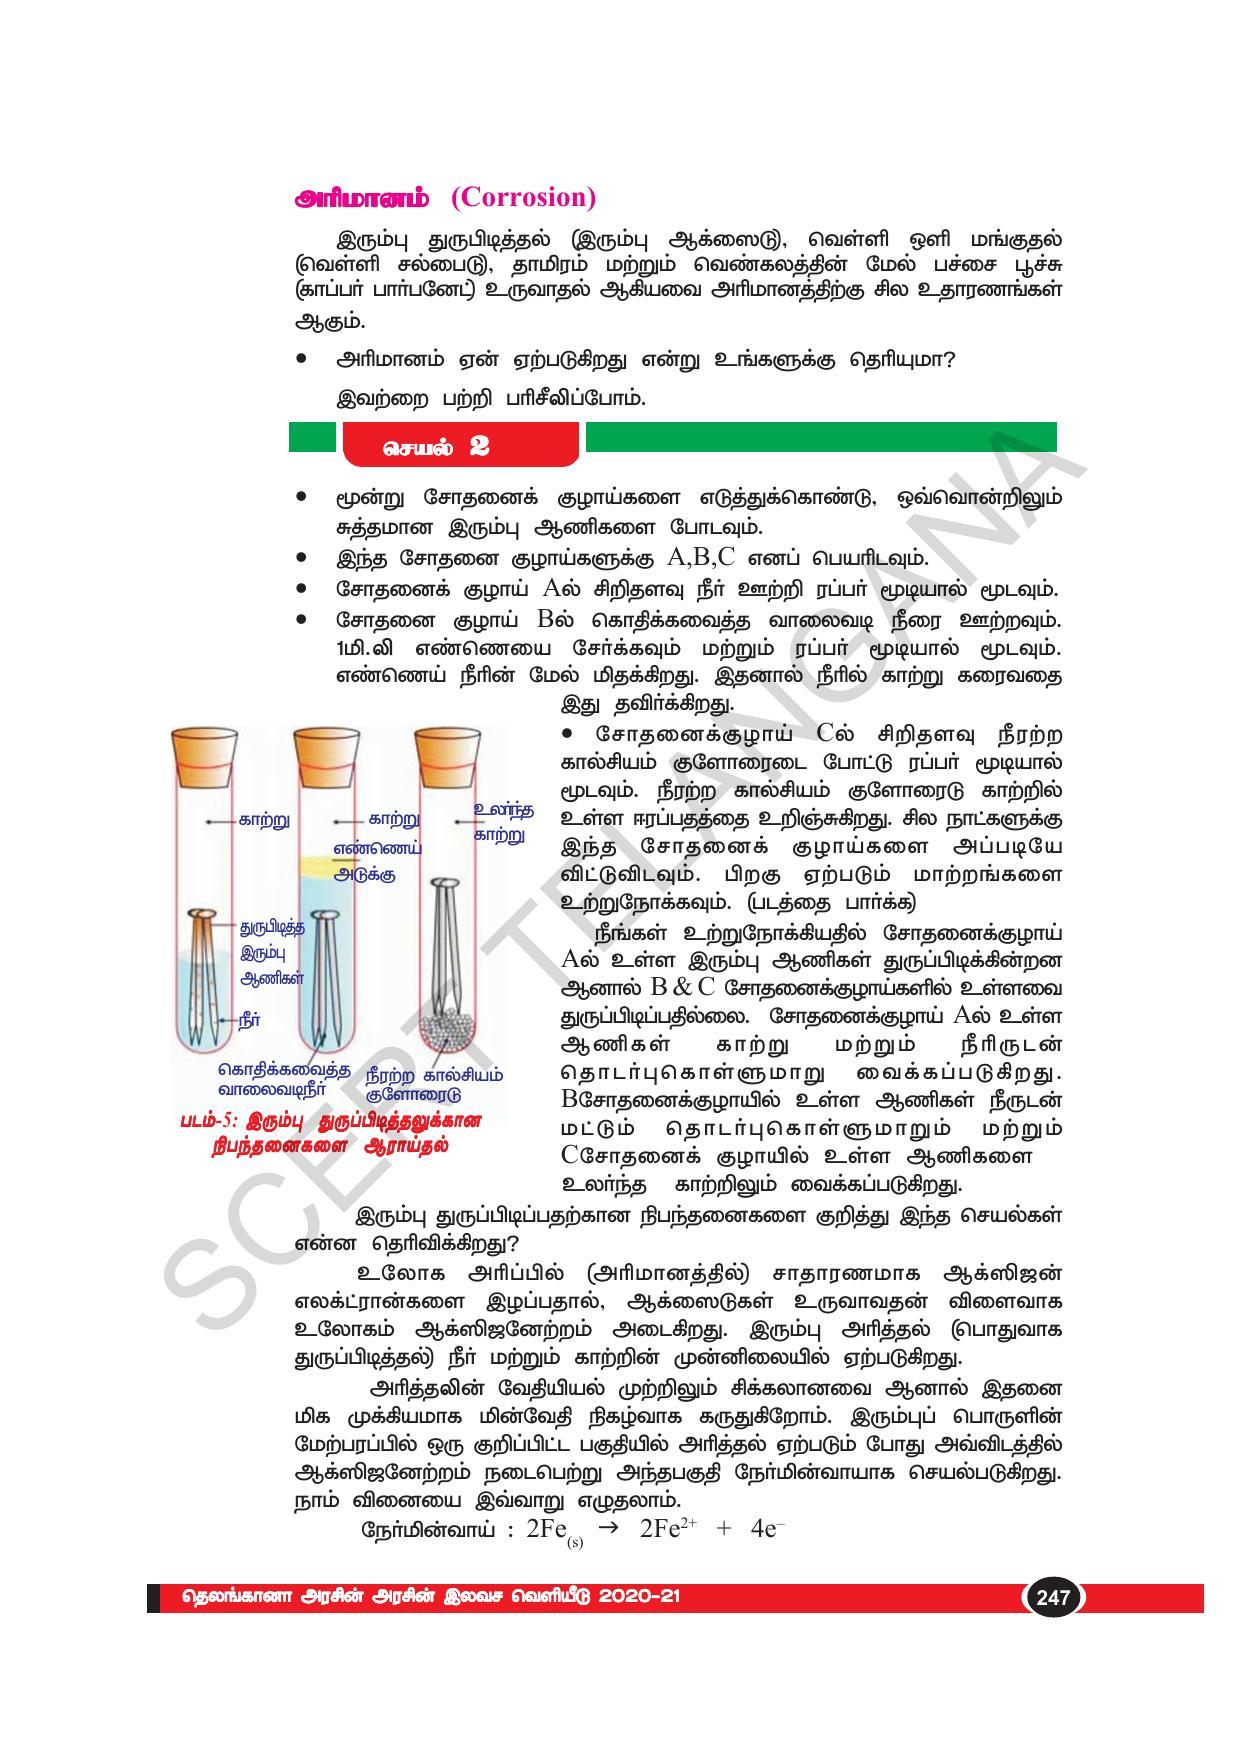 TS SCERT Class 10 Physical Science(Tamil Medium) Text Book - Page 259